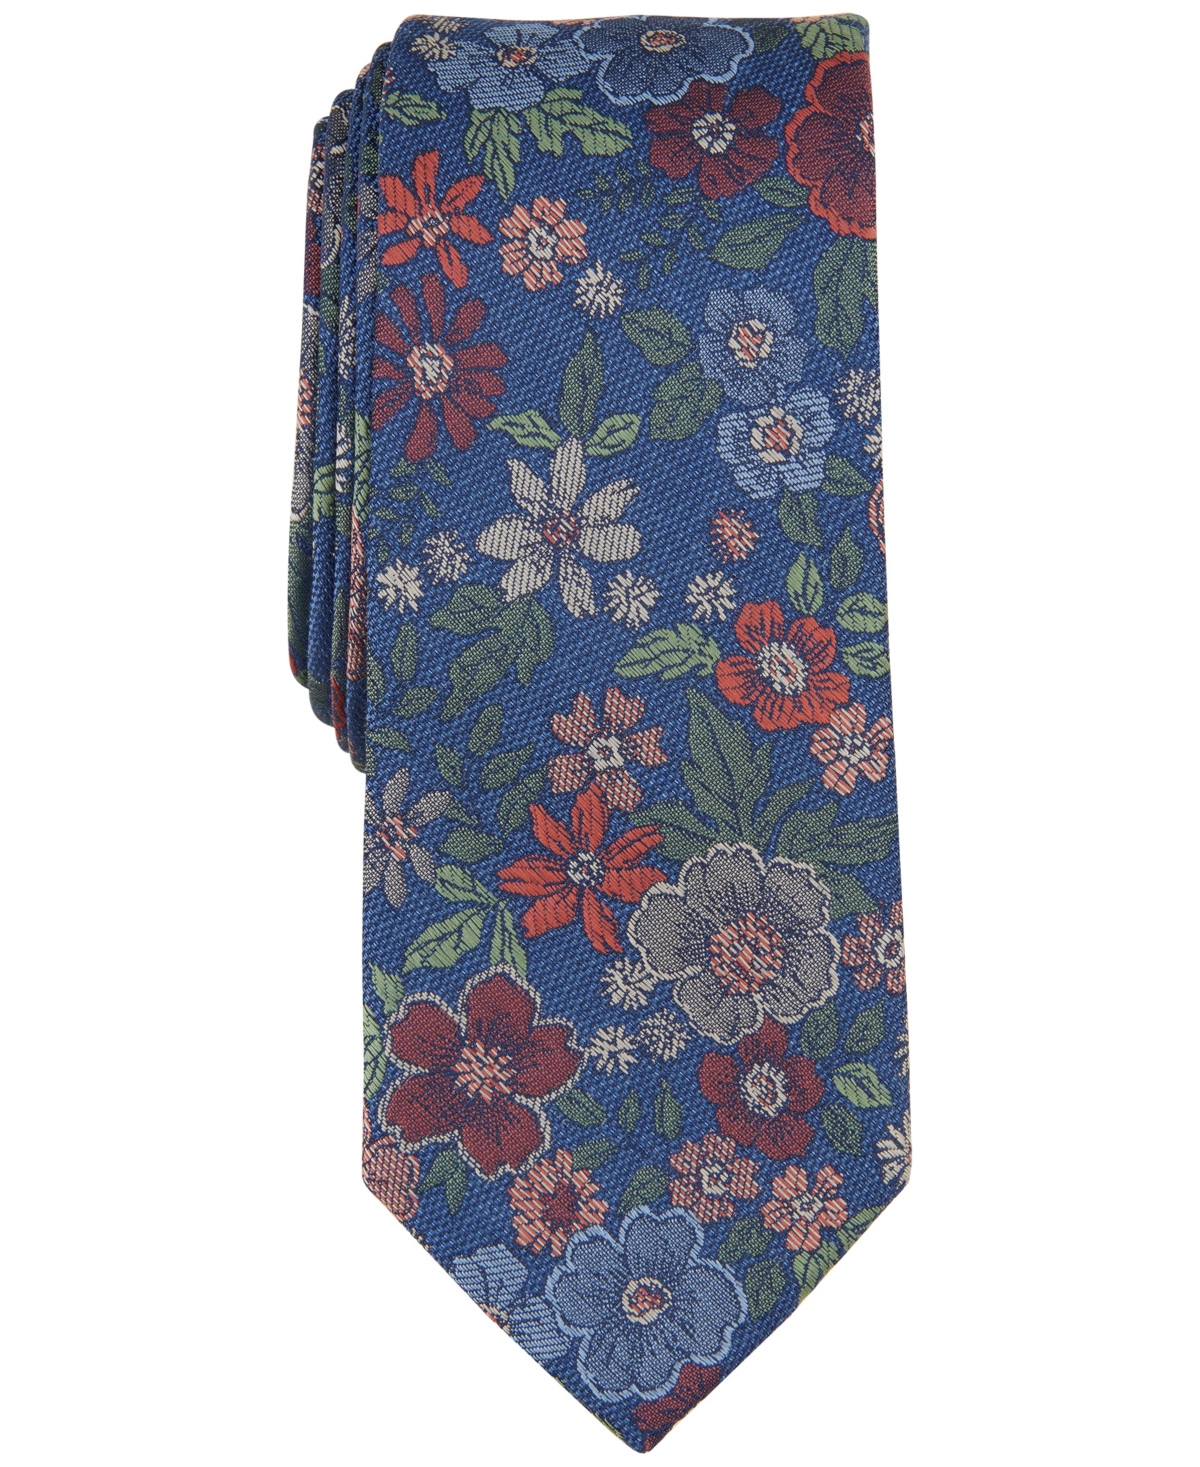 Men's Bloom Floral Tie, Created for Macy's - Bright Navy